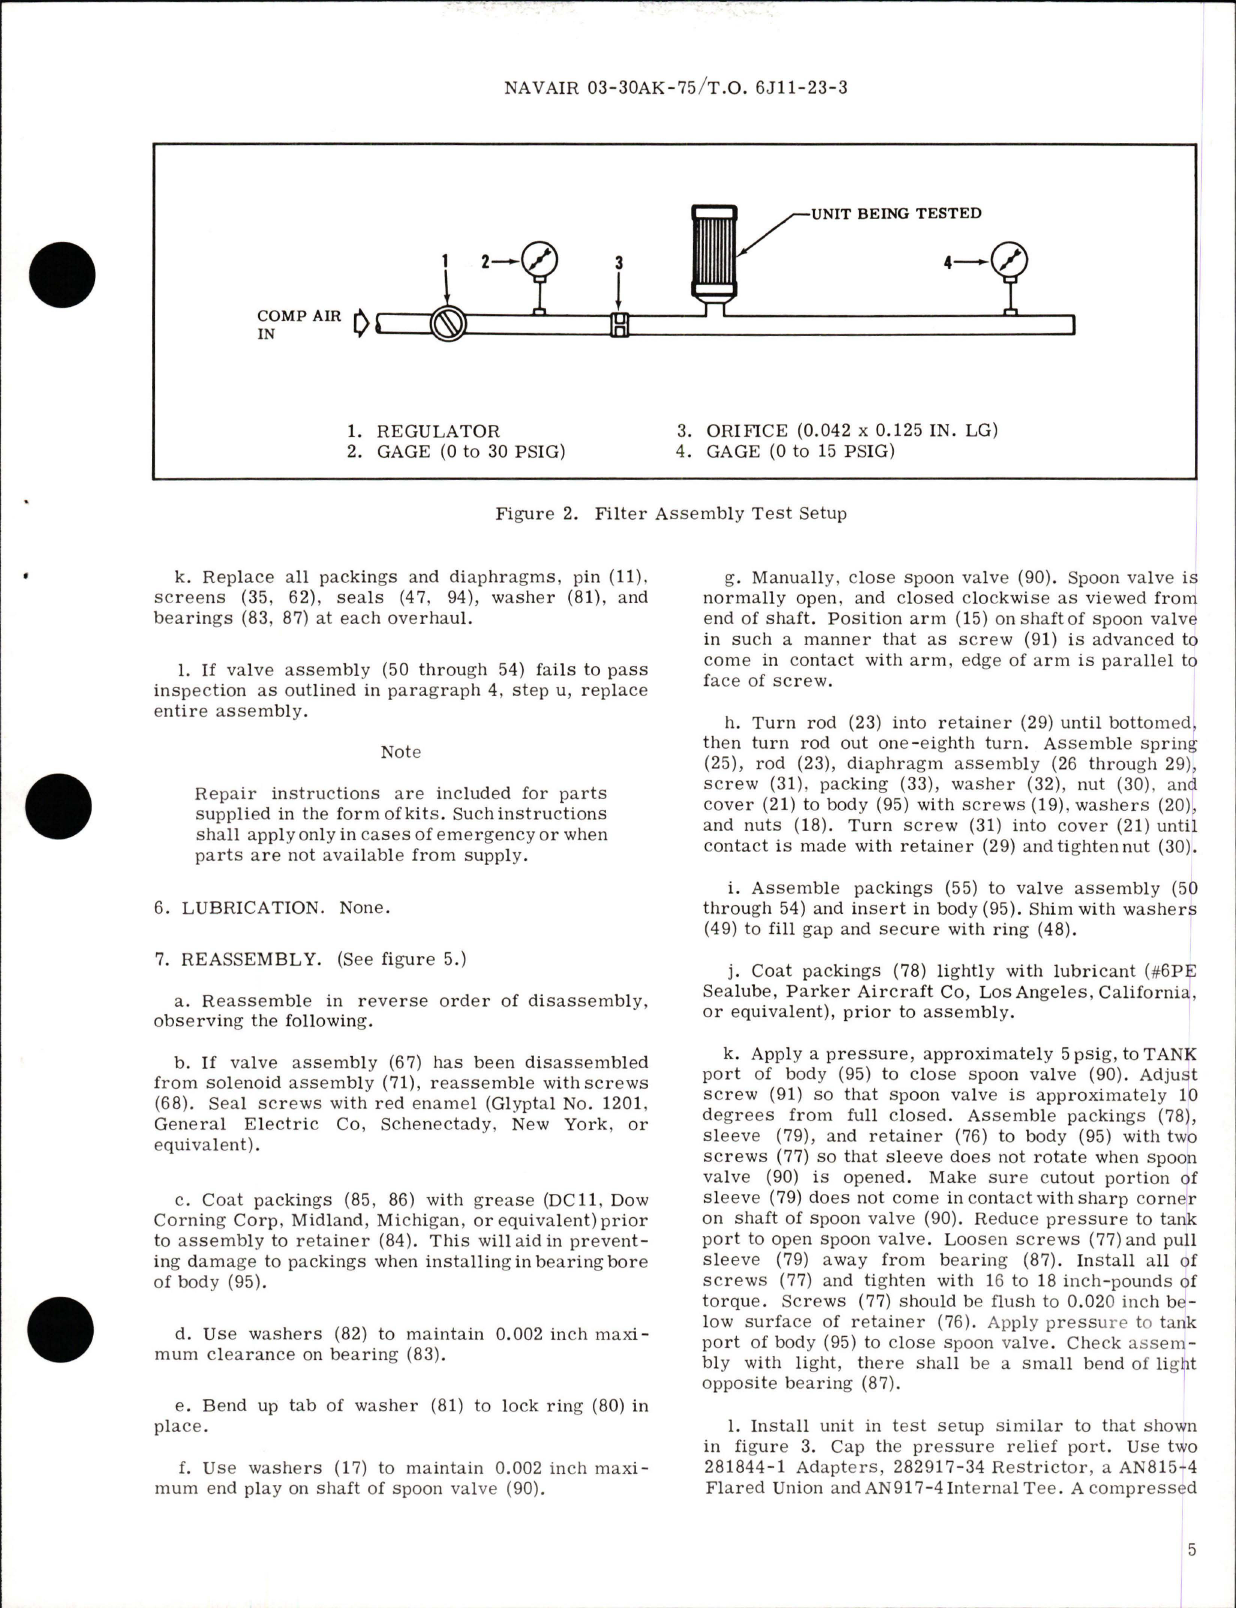 Sample page 7 from AirCorps Library document: Overhaul Instructions with Parts Breakdown for Air Pressure Regulators - Parts 108388, 108388-1-1, and 108388-2-1